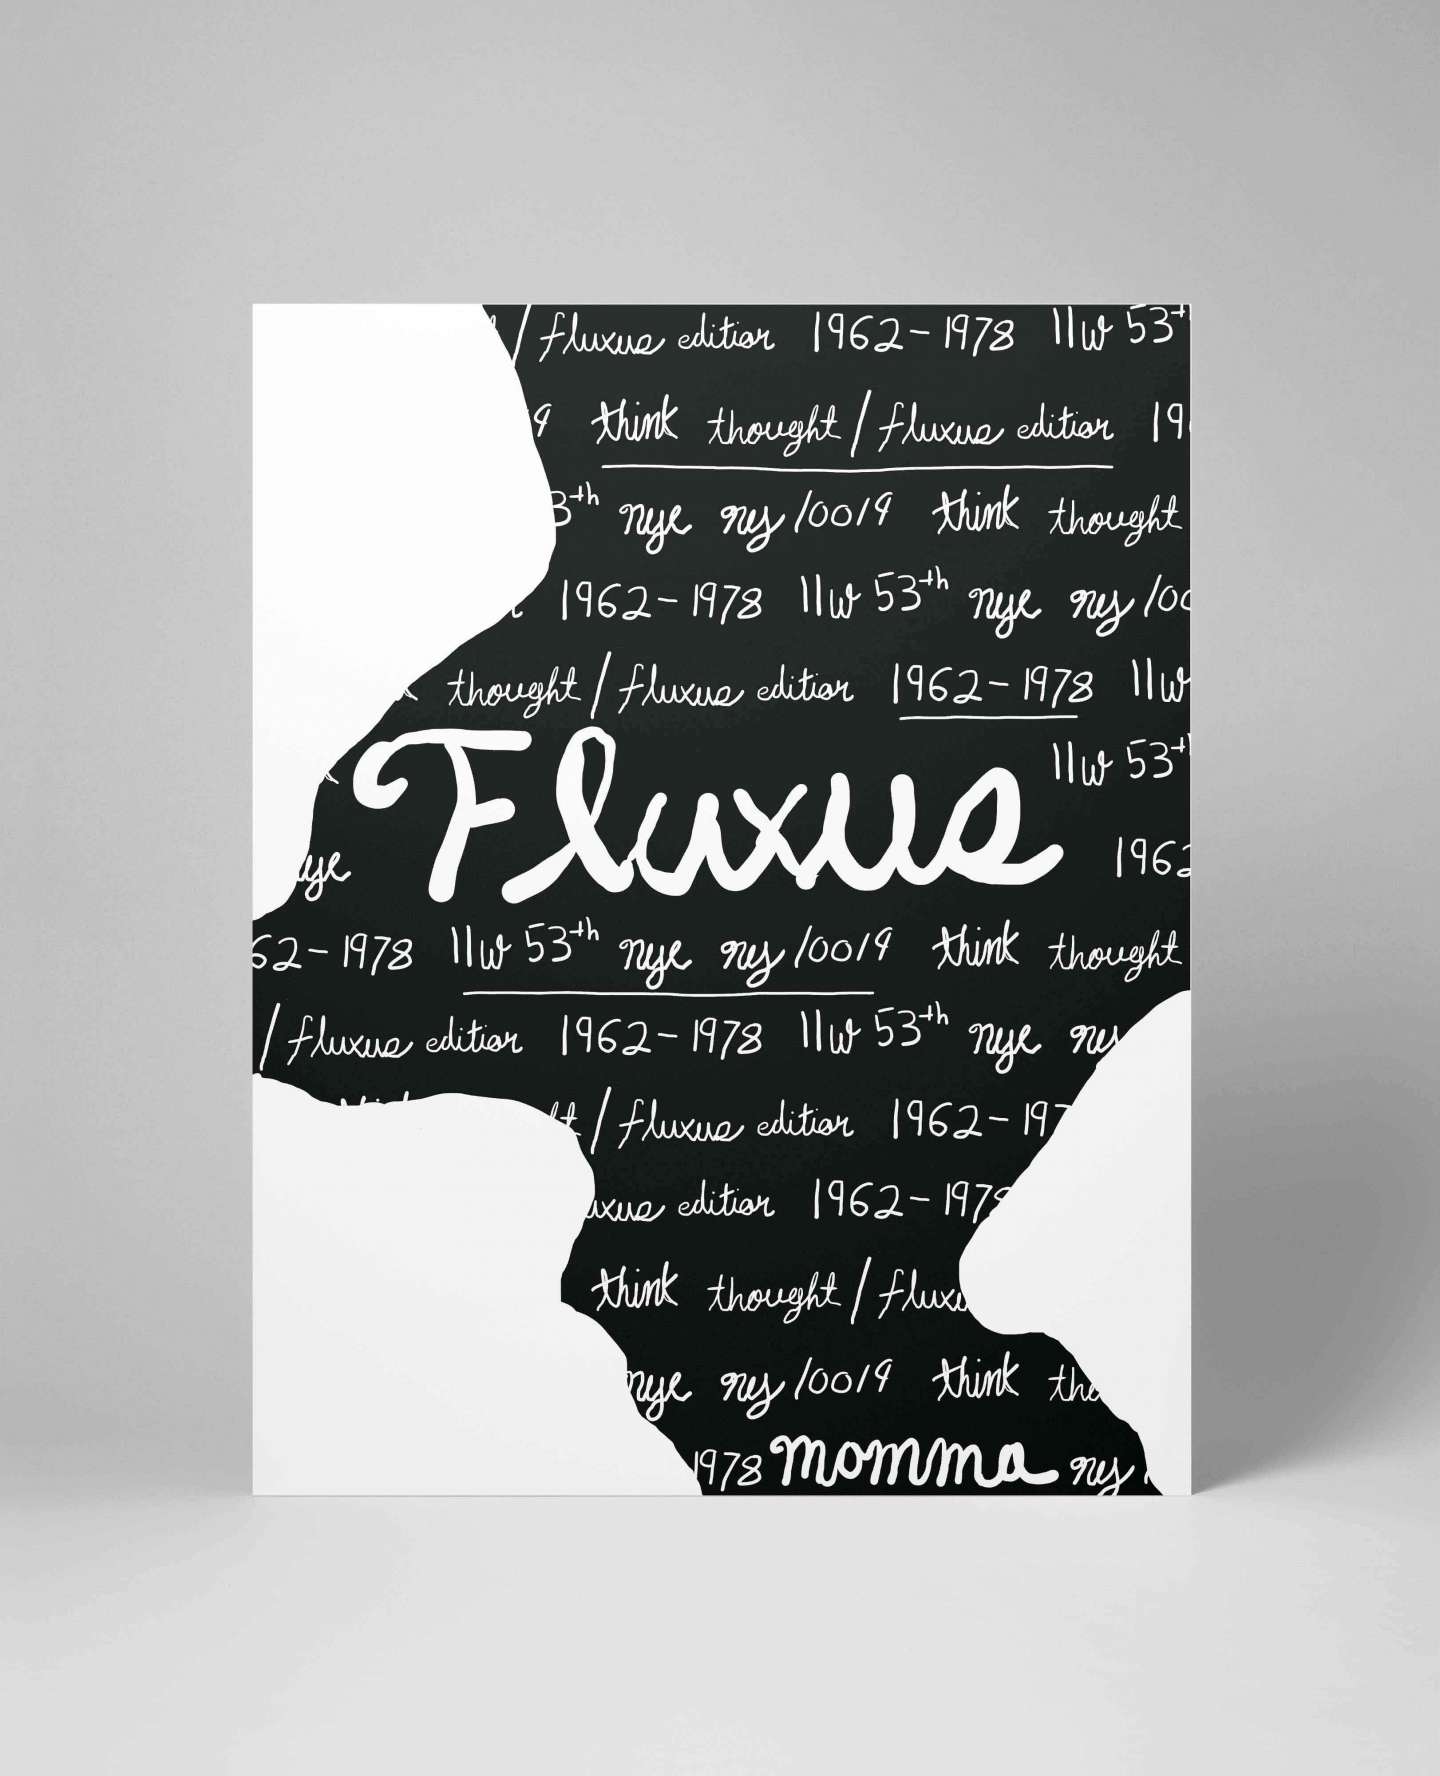 Think Thought / Fluxus Edition